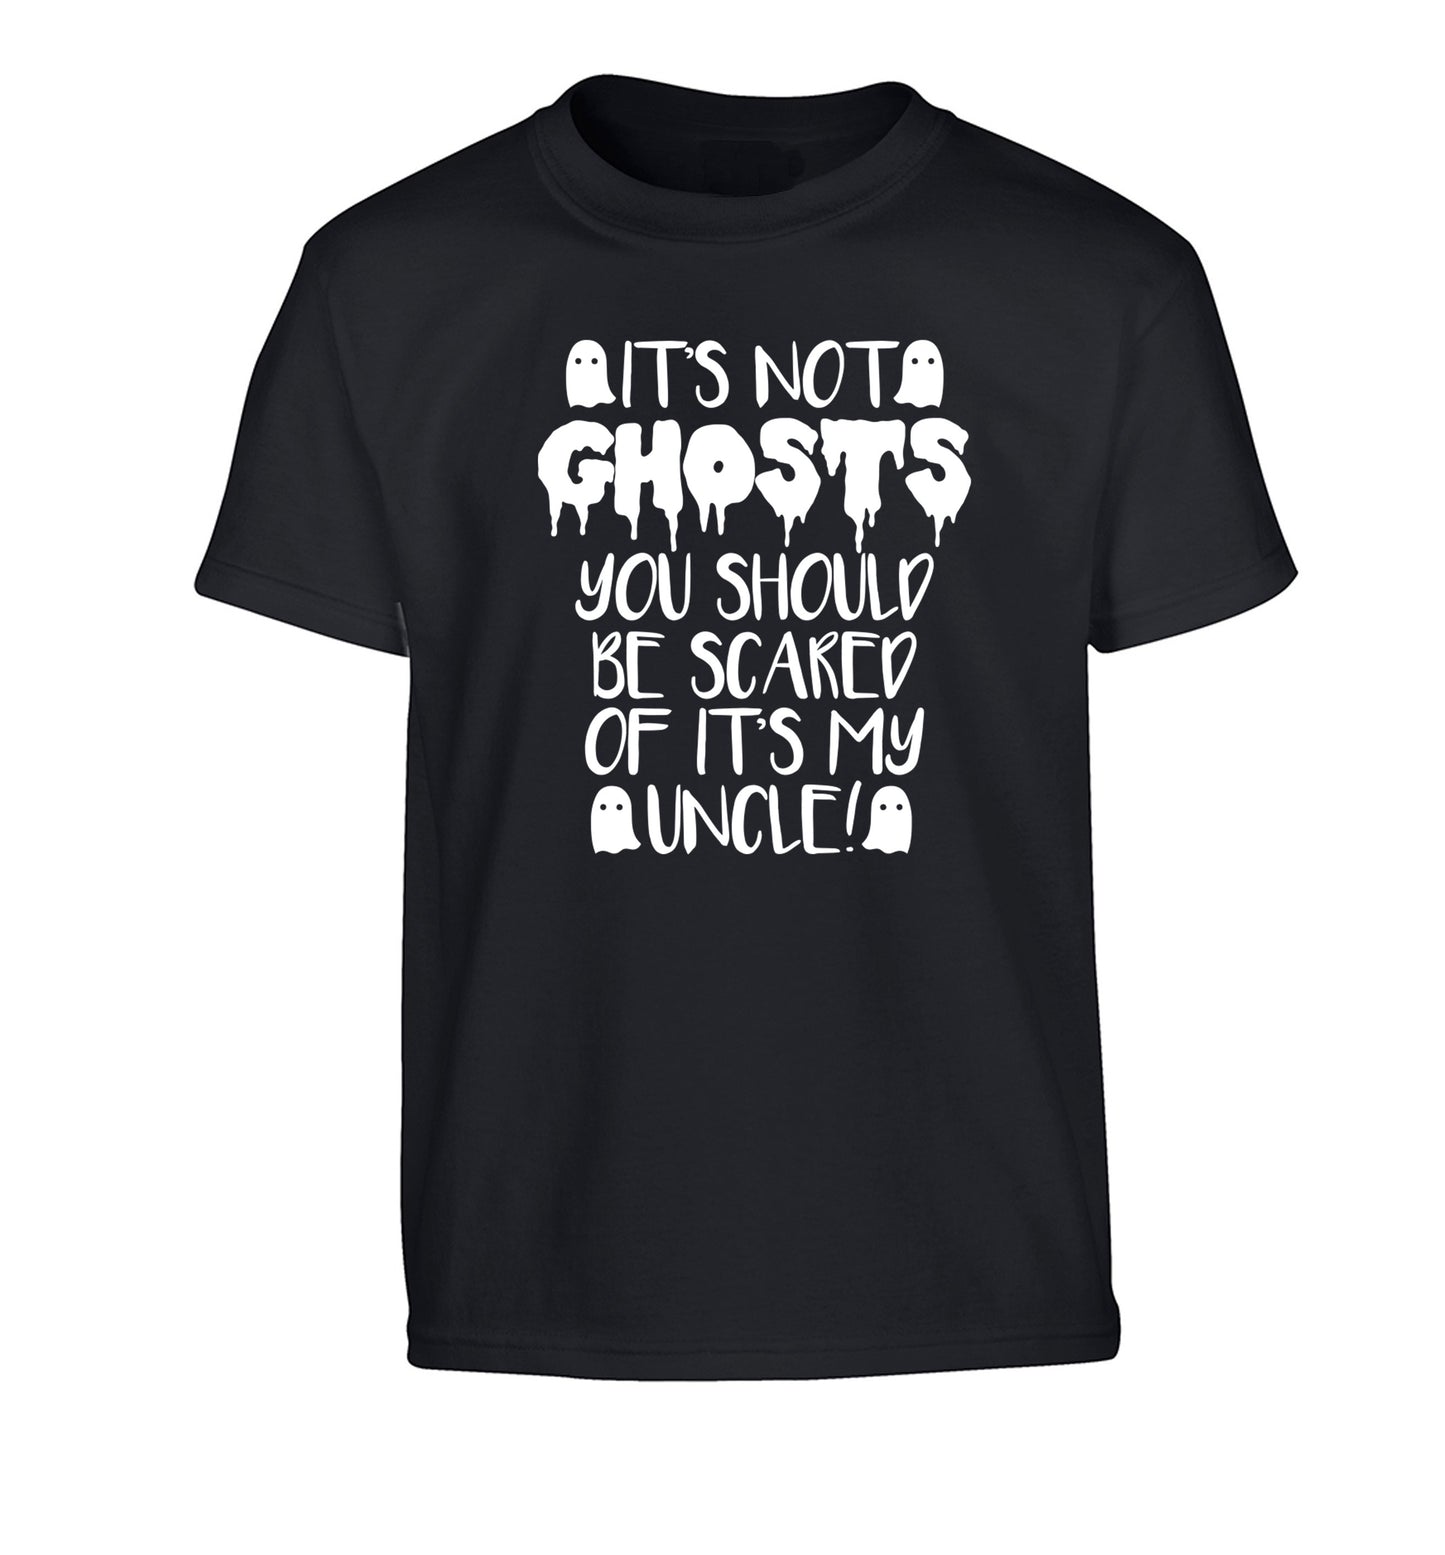 It's not ghosts you should be scared of it's my uncle! Children's black Tshirt 12-14 Years